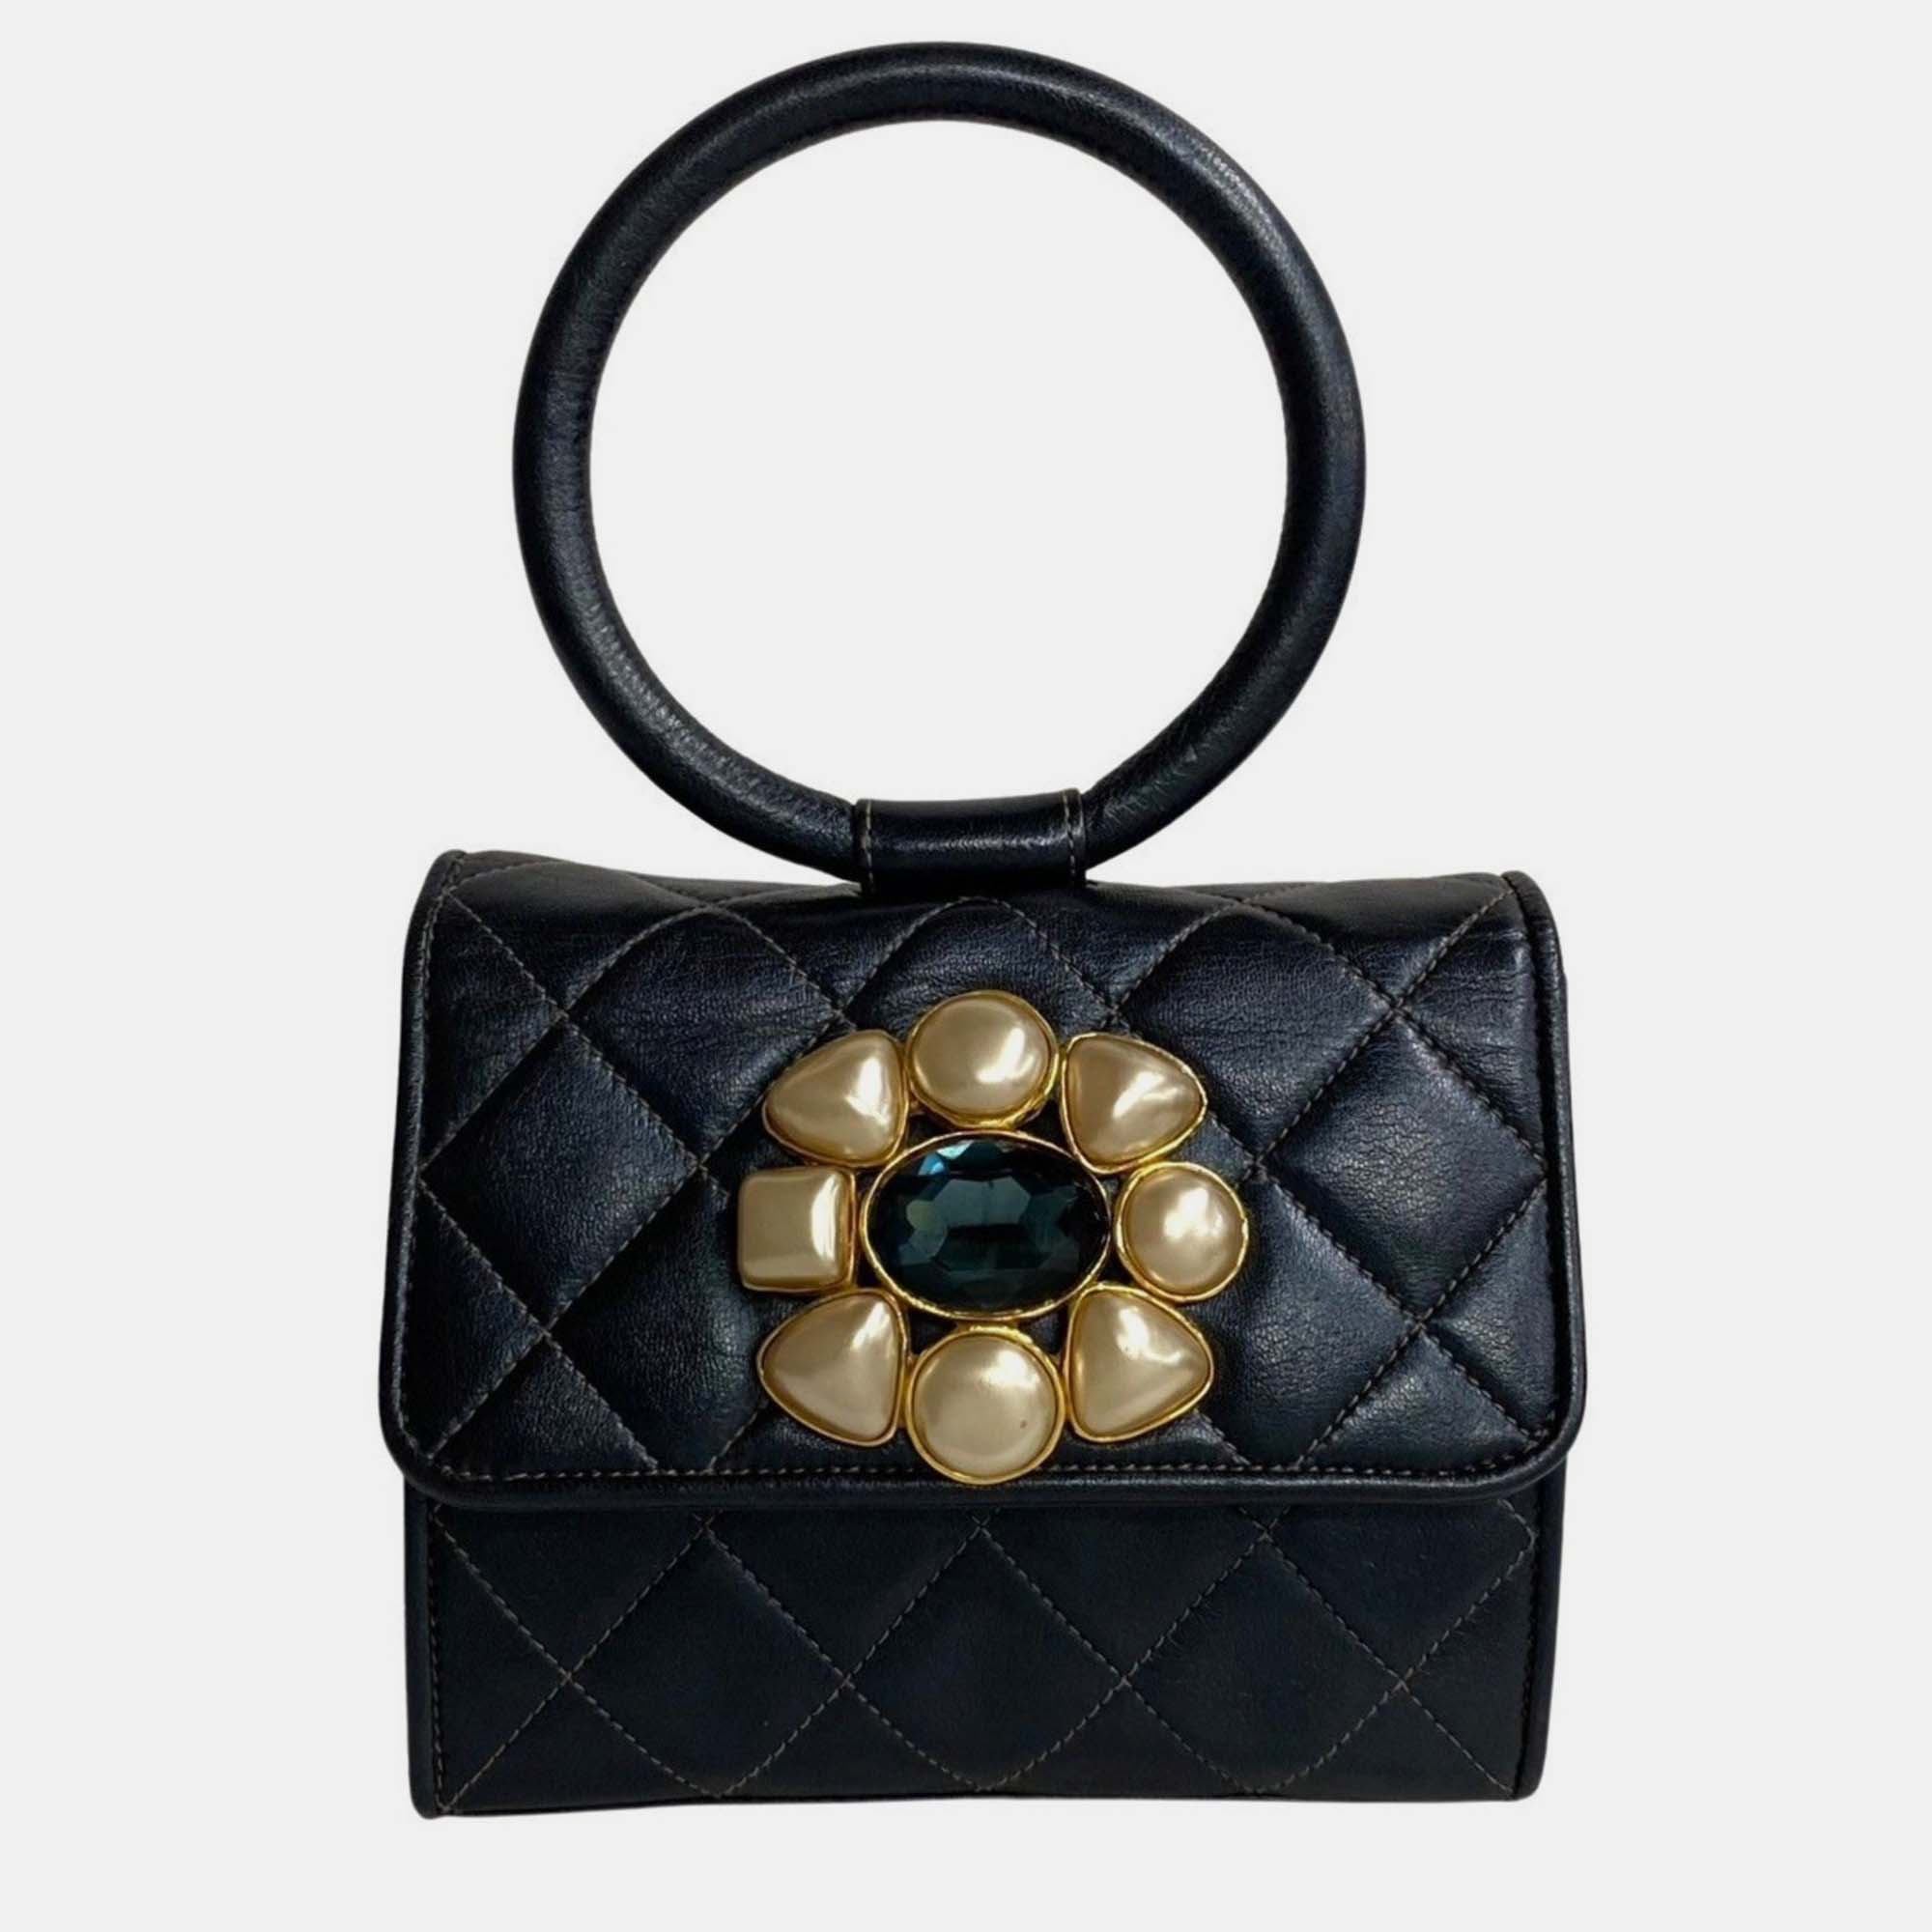 Chanel lambskin evening bag with pearls and jewell bracelet bag